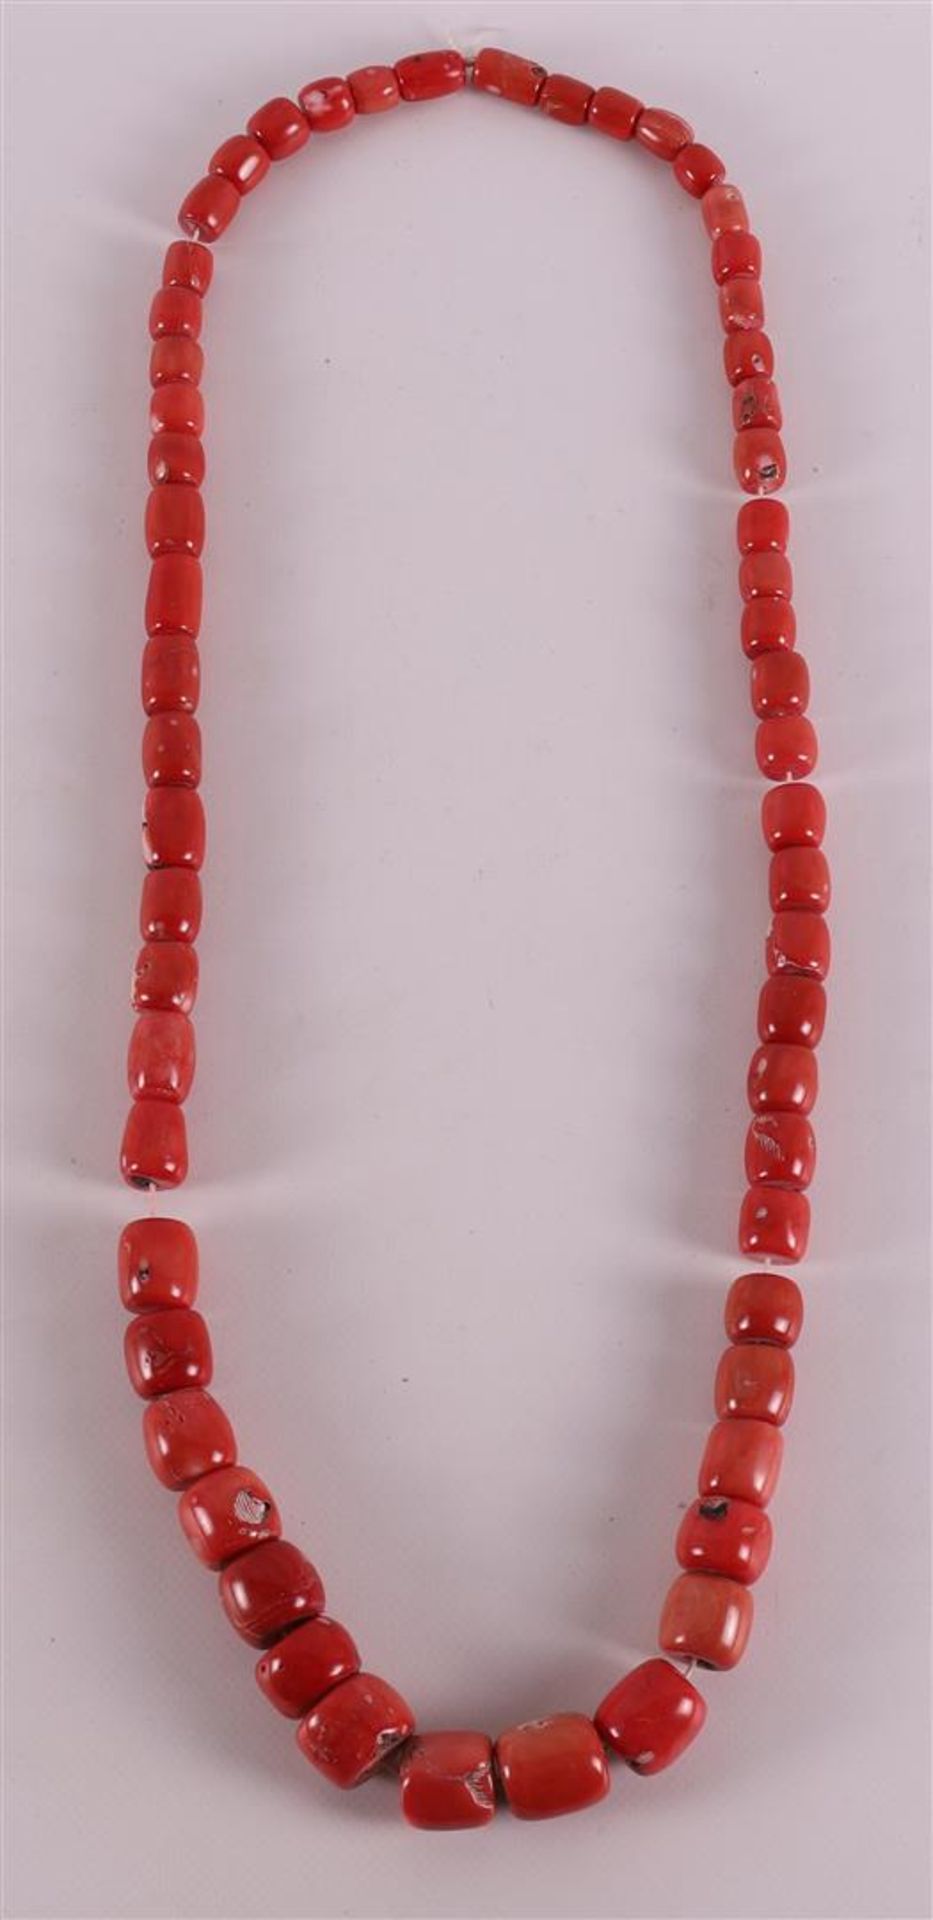 A necklace of coarse ascending red corals